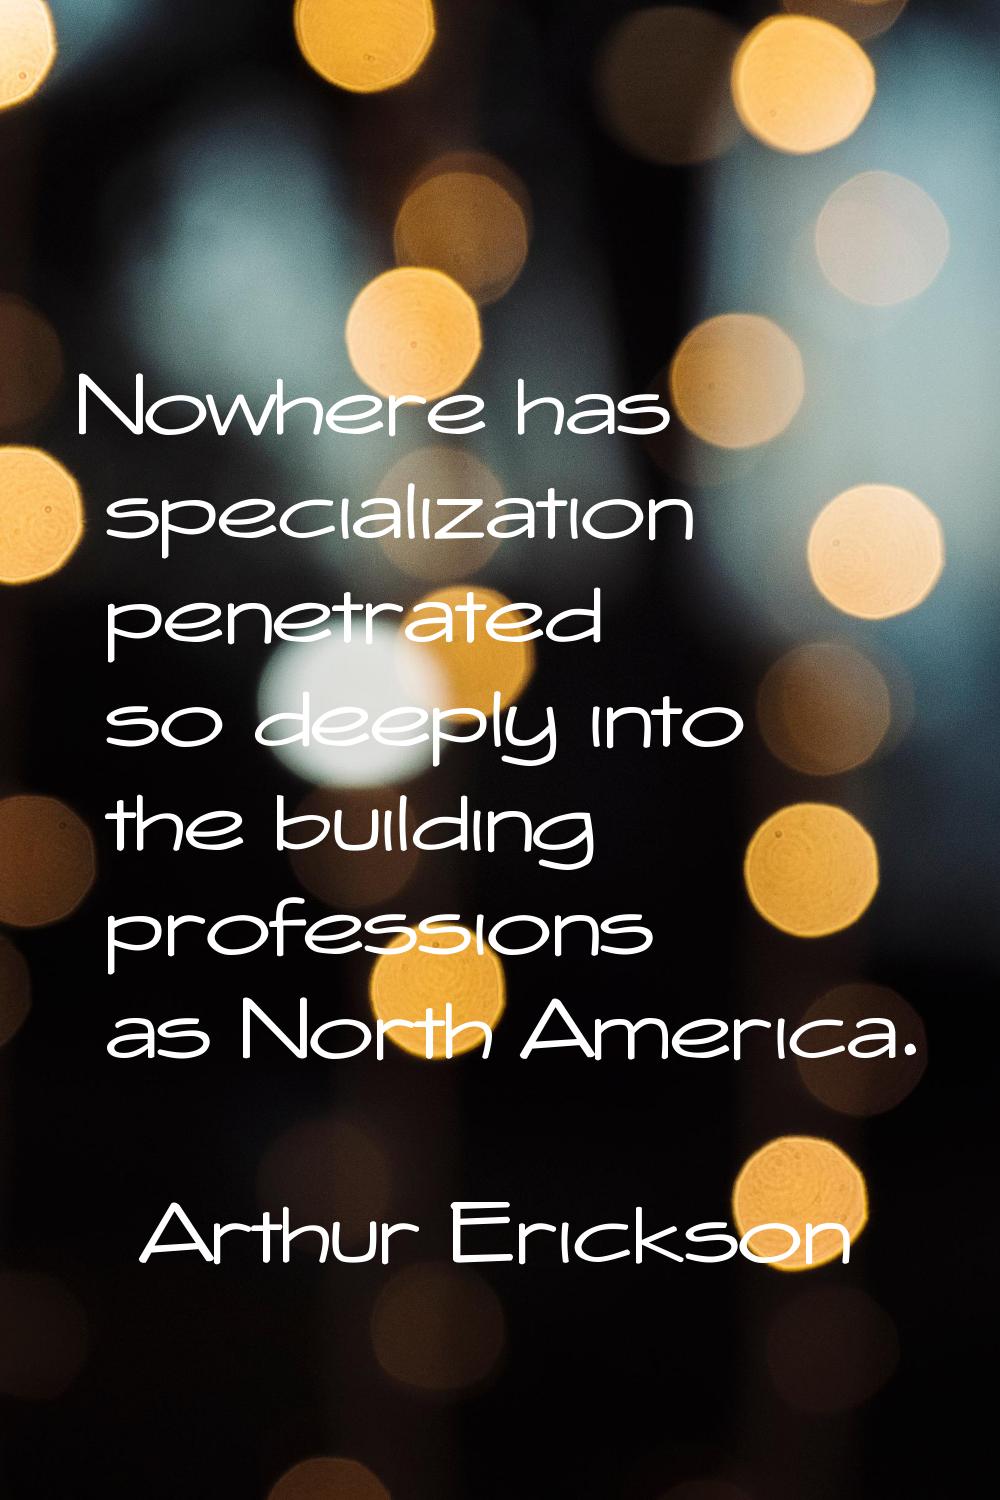 Nowhere has specialization penetrated so deeply into the building professions as North America.